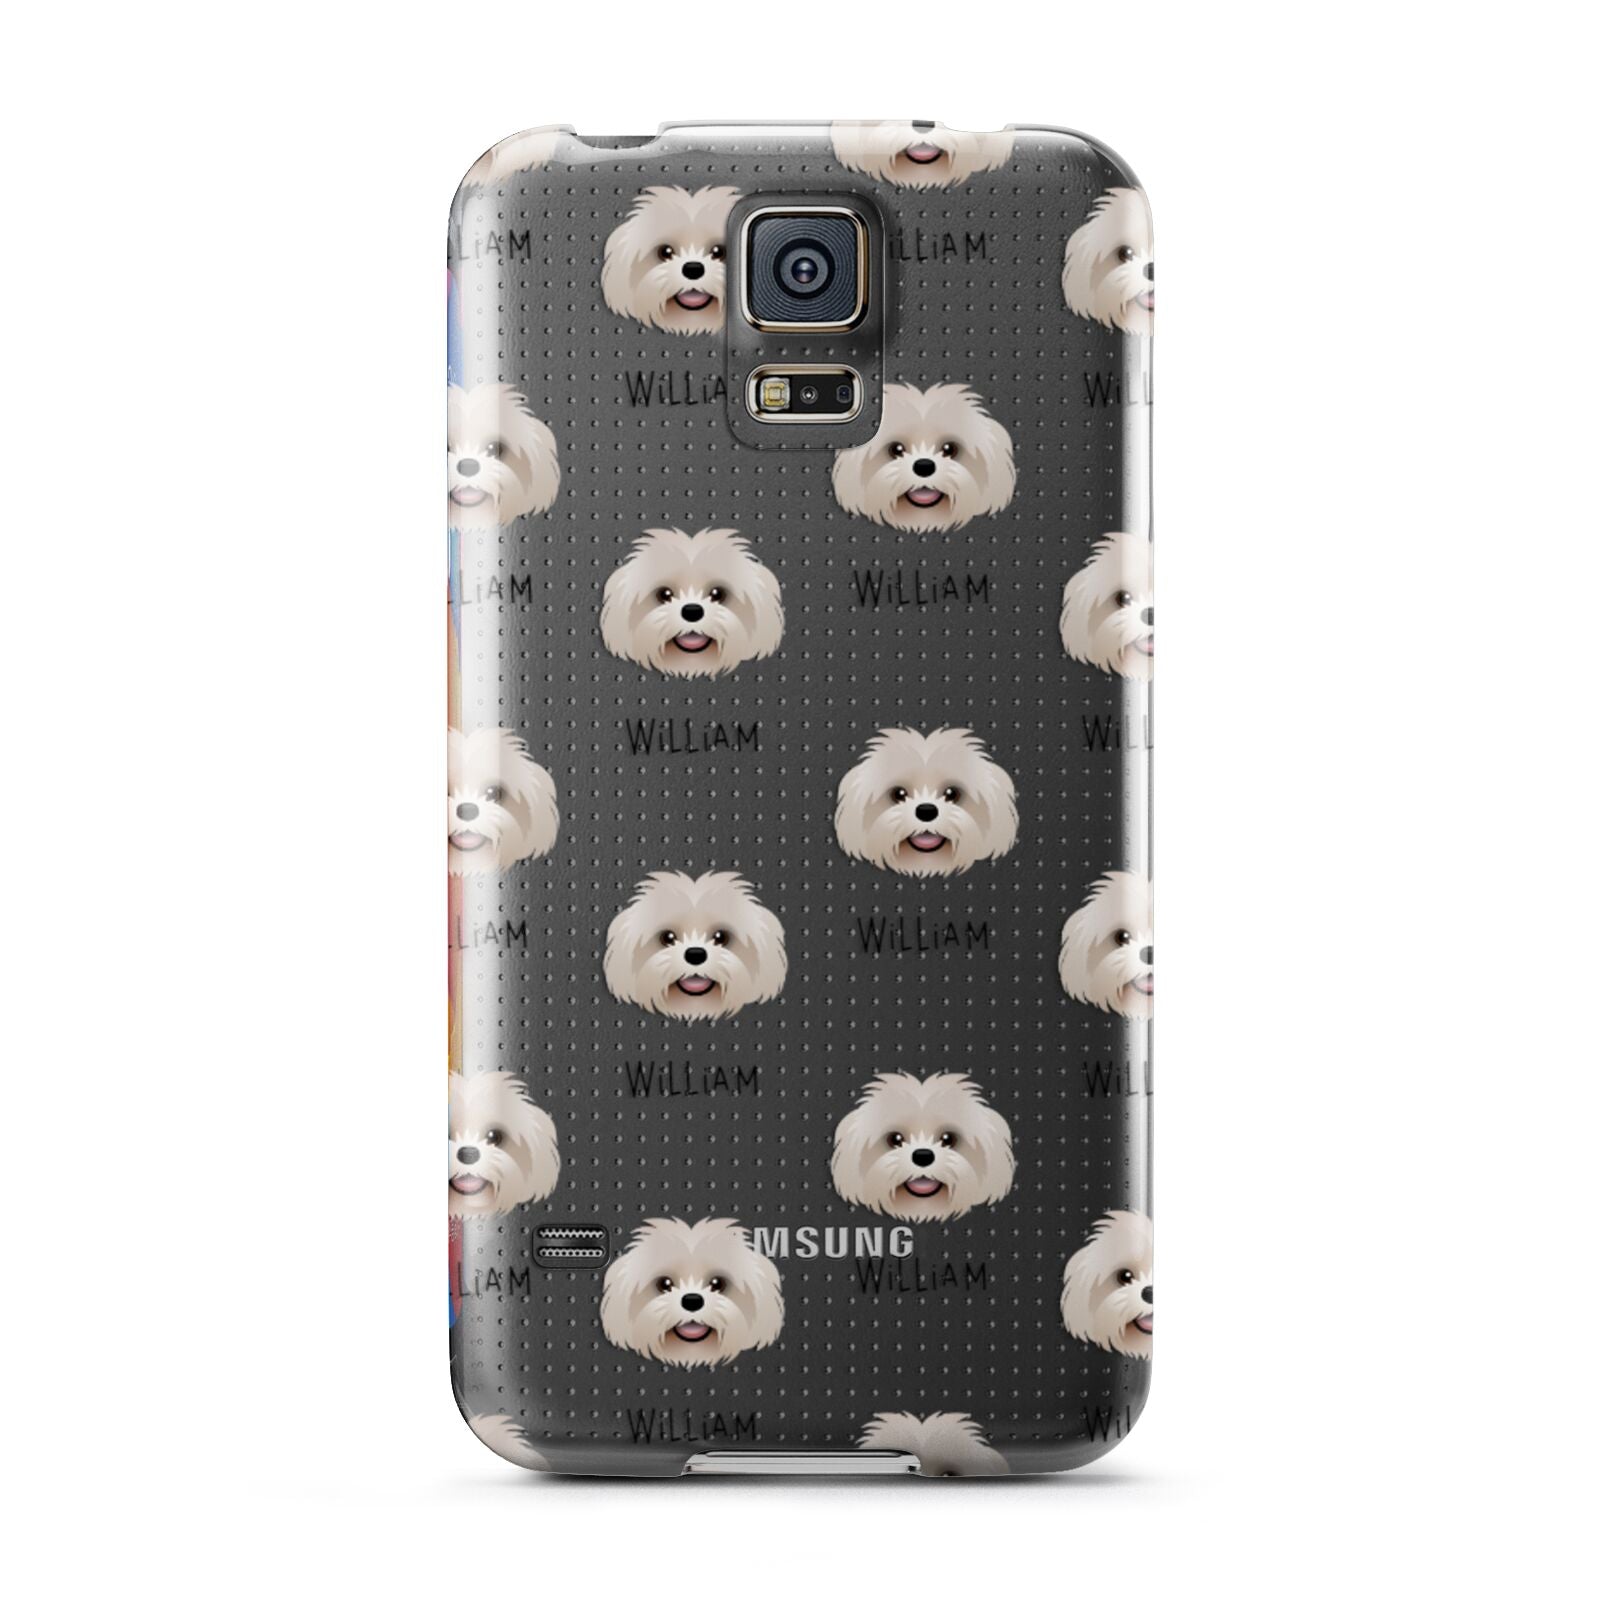 Shih Poo Icon with Name Samsung Galaxy S5 Case